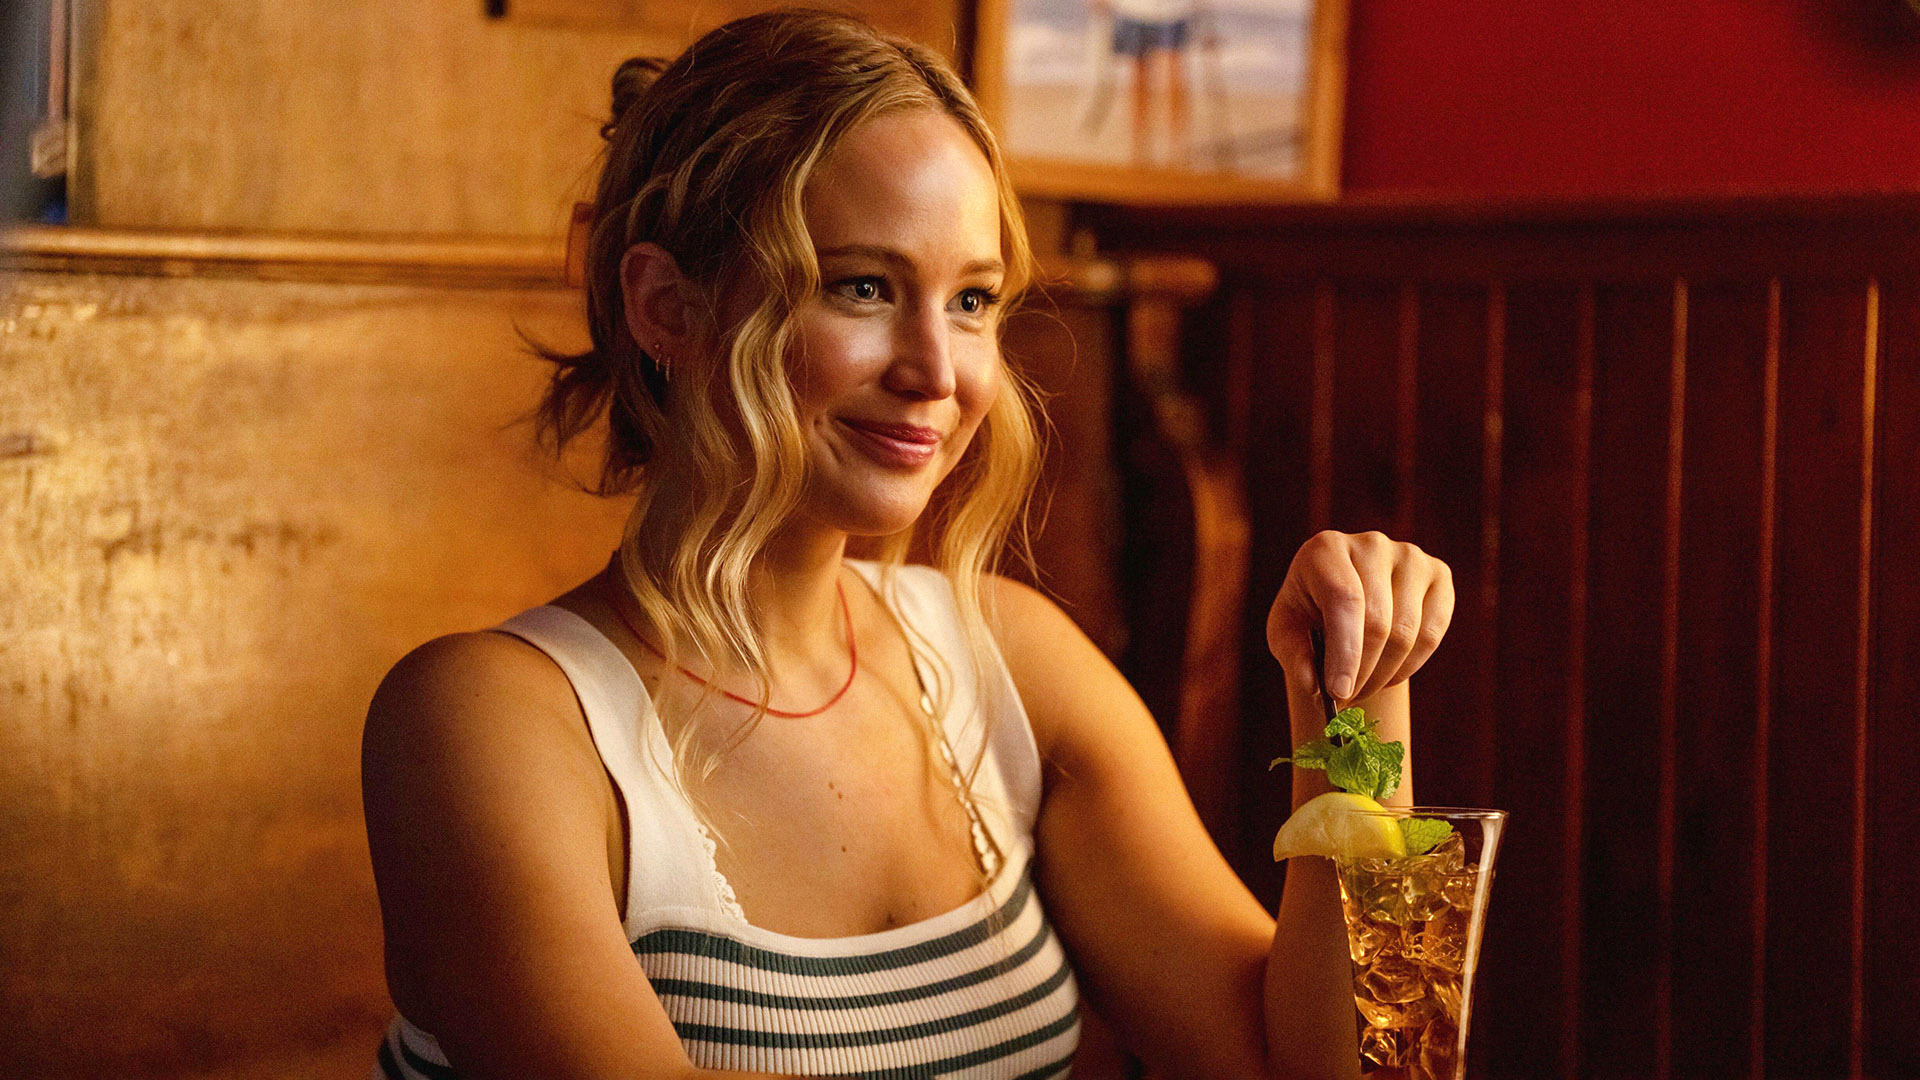 Craigslist Ad JLaw's No Hard Feelings Is Based On Actually Existed in Real Life